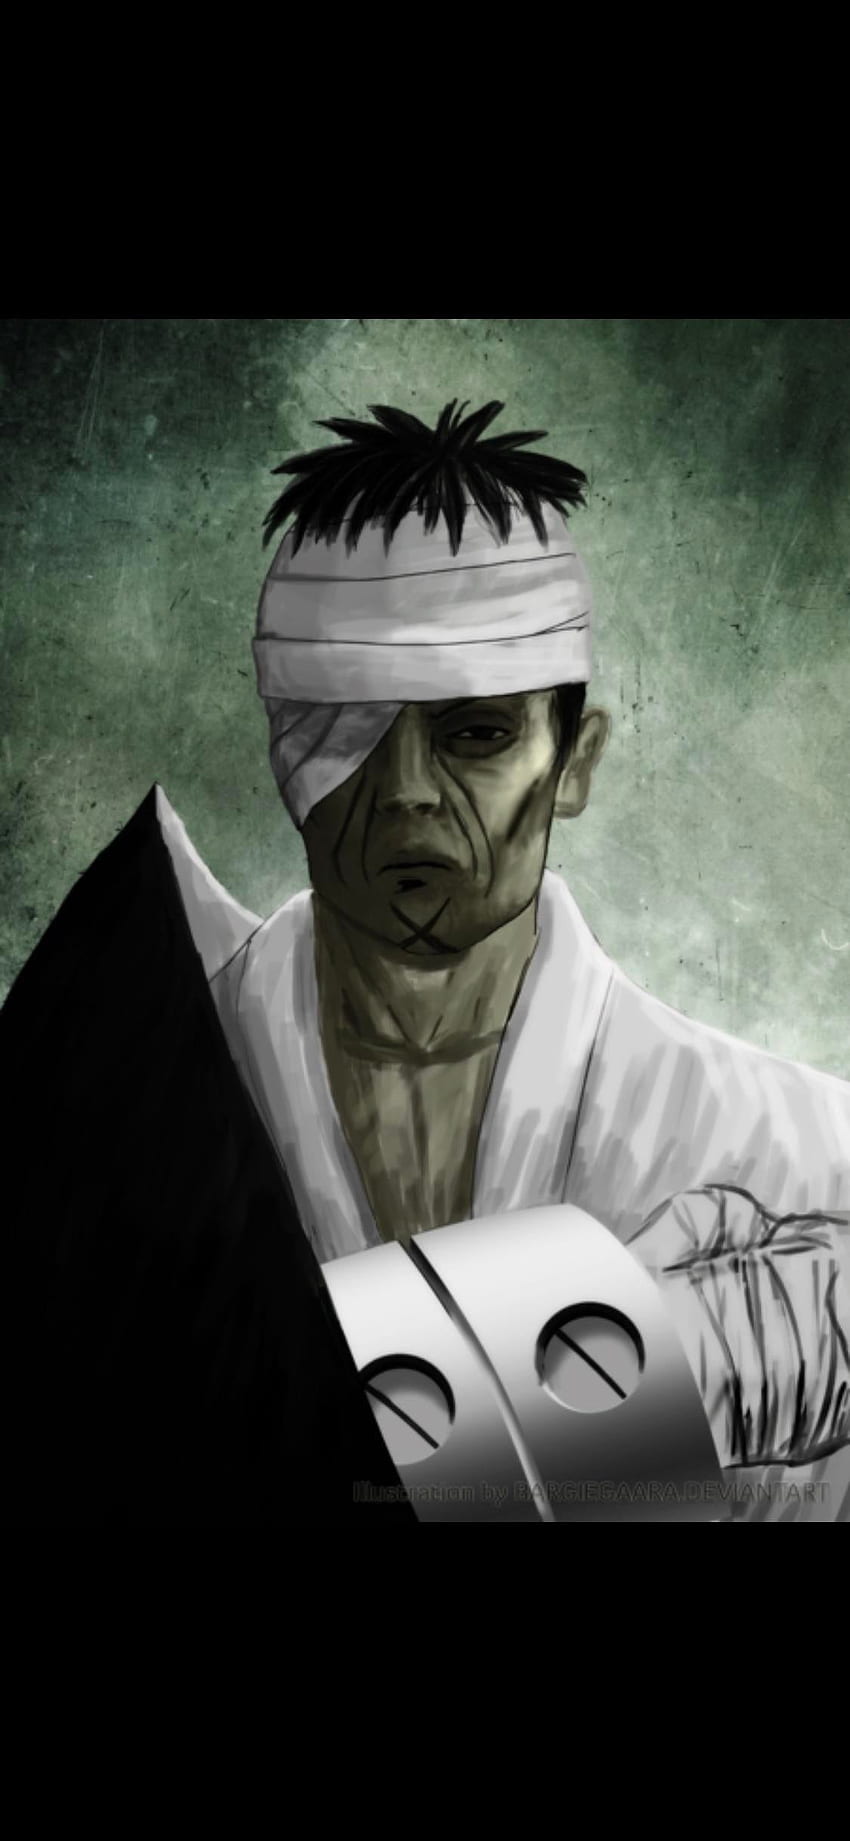 Danzo Shimura is without a doubt the most pure evil character in Naruto. He is directly and Indirectly responsible for most of the atrocities that took place in the series. His death HD phone wallpaper